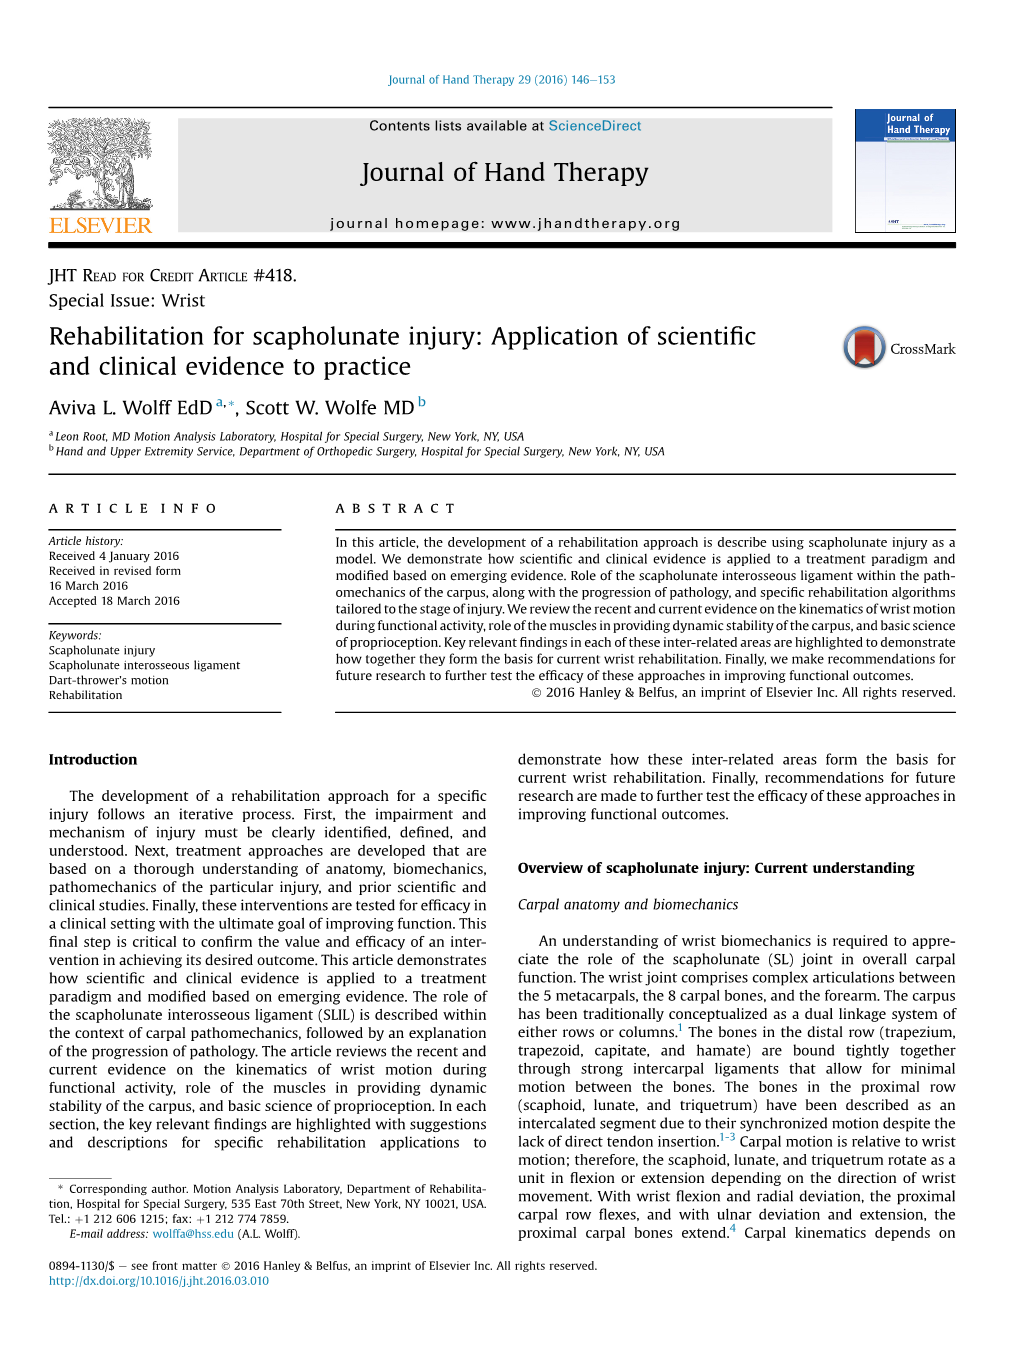 Rehabilitation for Scapholunate Injury: Application of Scientiﬁc and Clinical Evidence to Practice